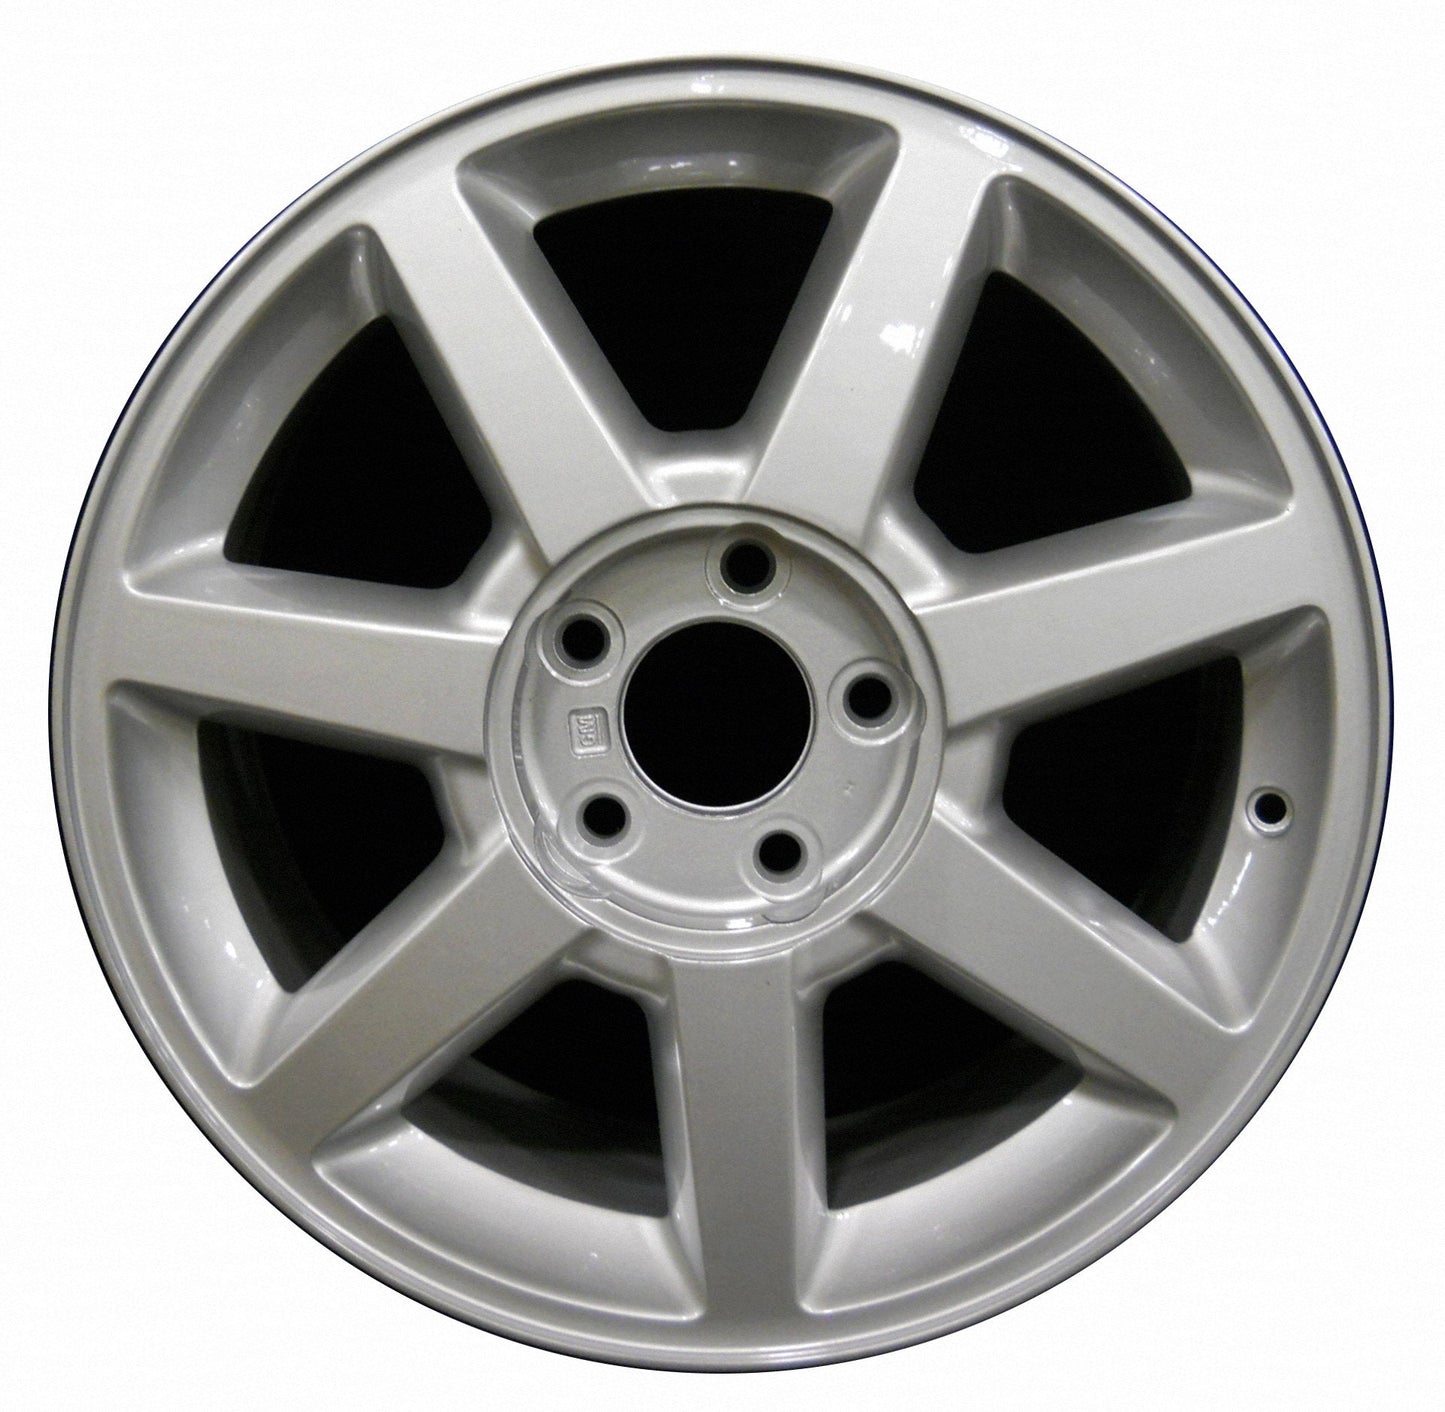 Cadillac STS  2005, 2006, 2007, 2008 Factory OEM Car Wheel Size 17x8 Alloy WAO.4587RE.LS01.FF